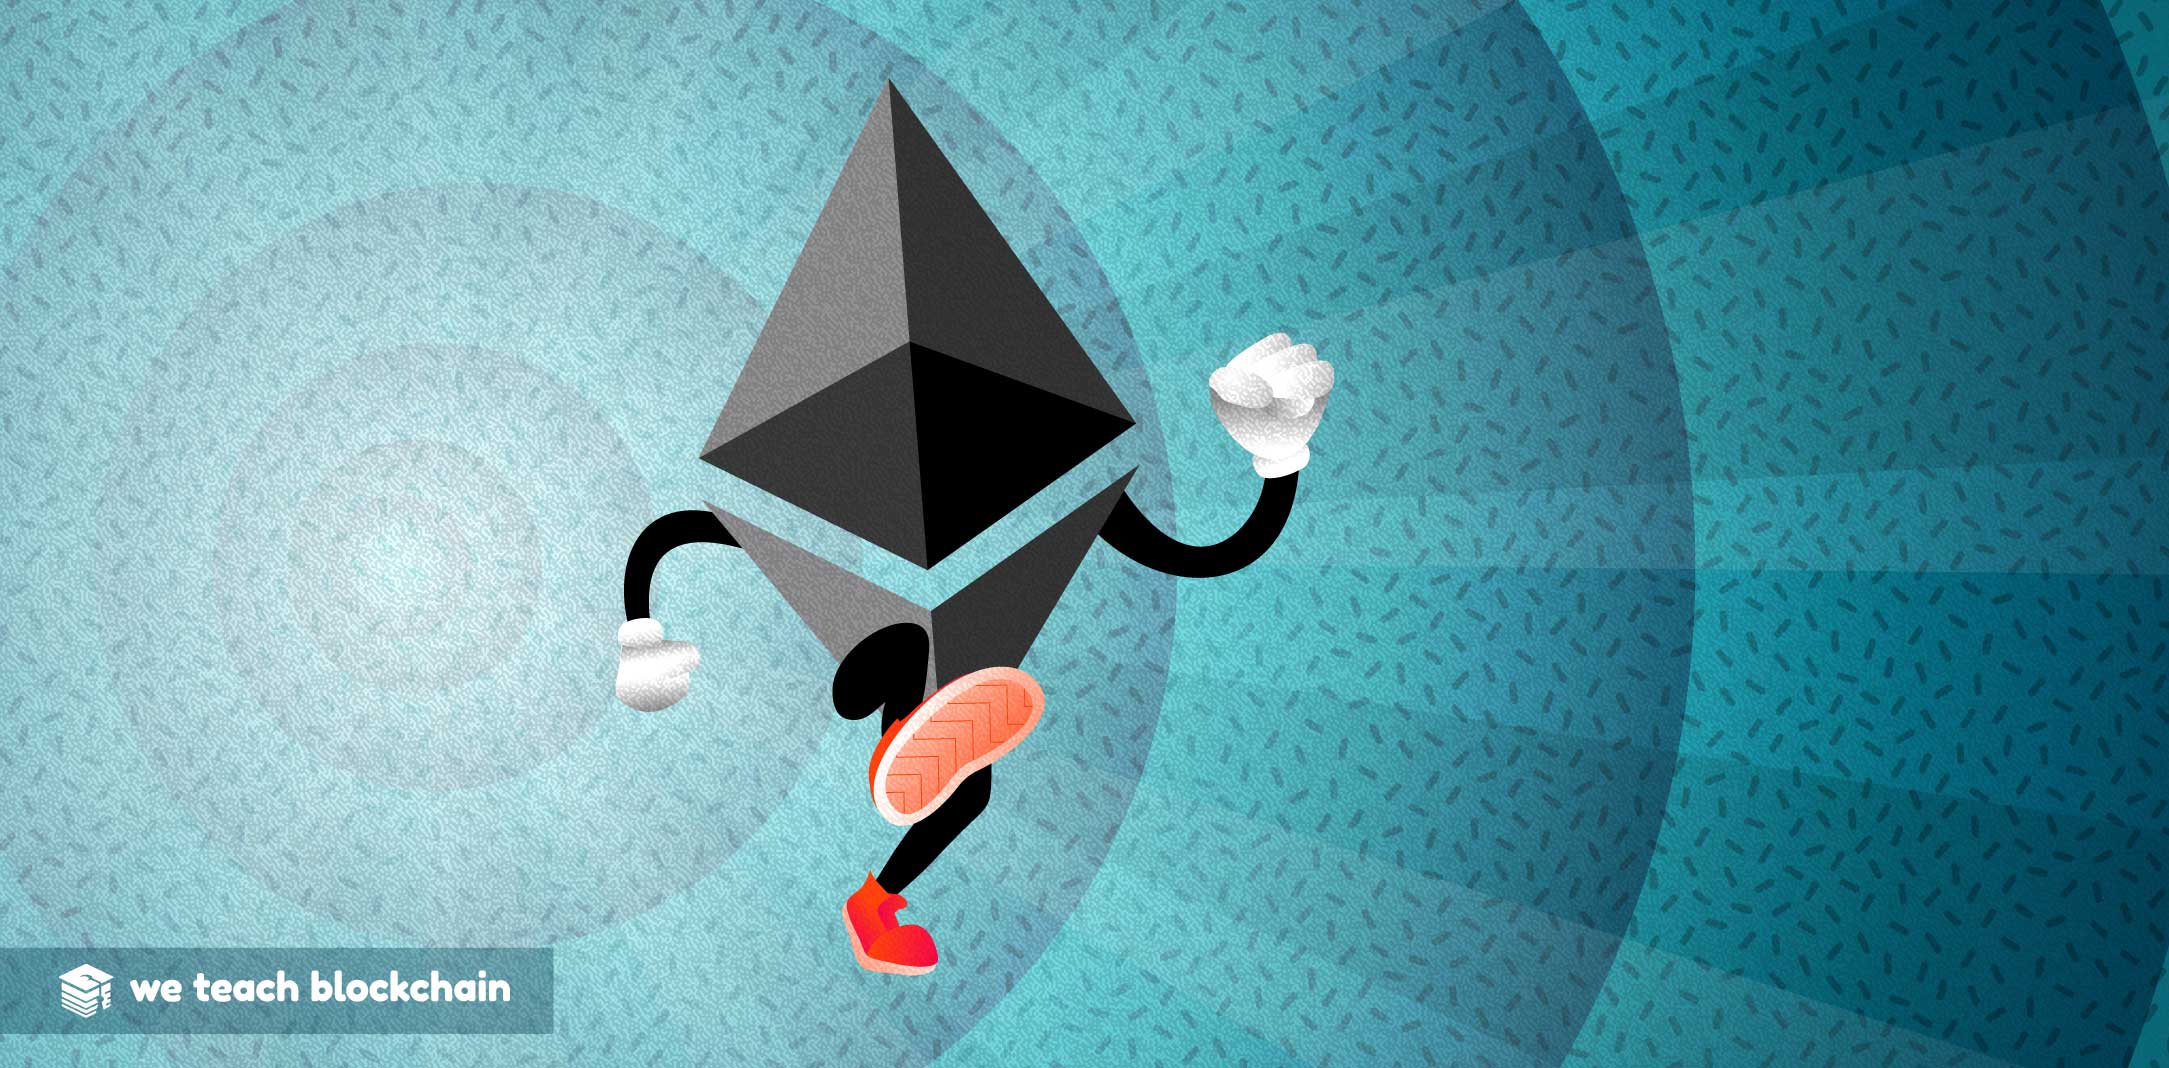 The Ethereum logo with legs running